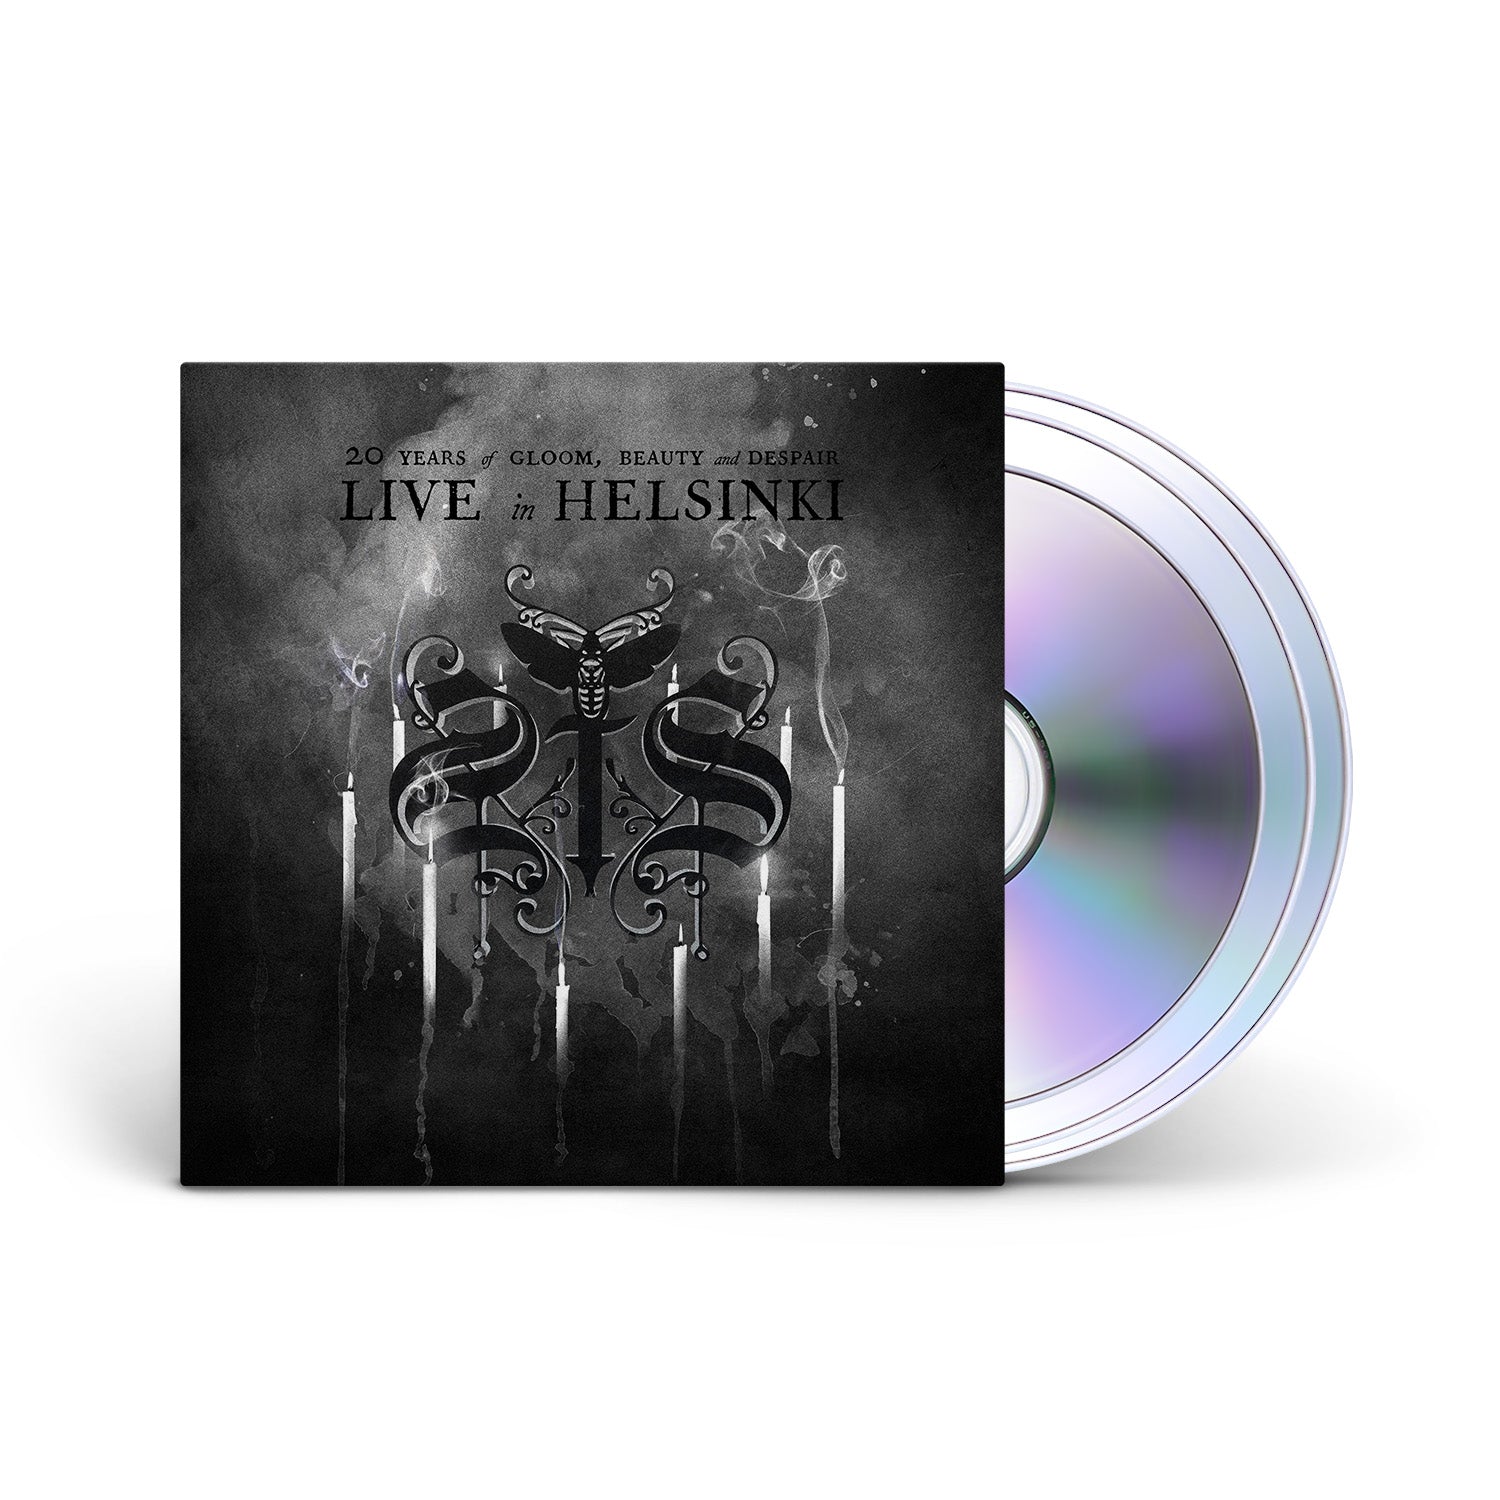 SWALLOW THE SUN - 20 Years of Gloom, Beauty and Despair - Live in Helsinki - 2CD + DVD